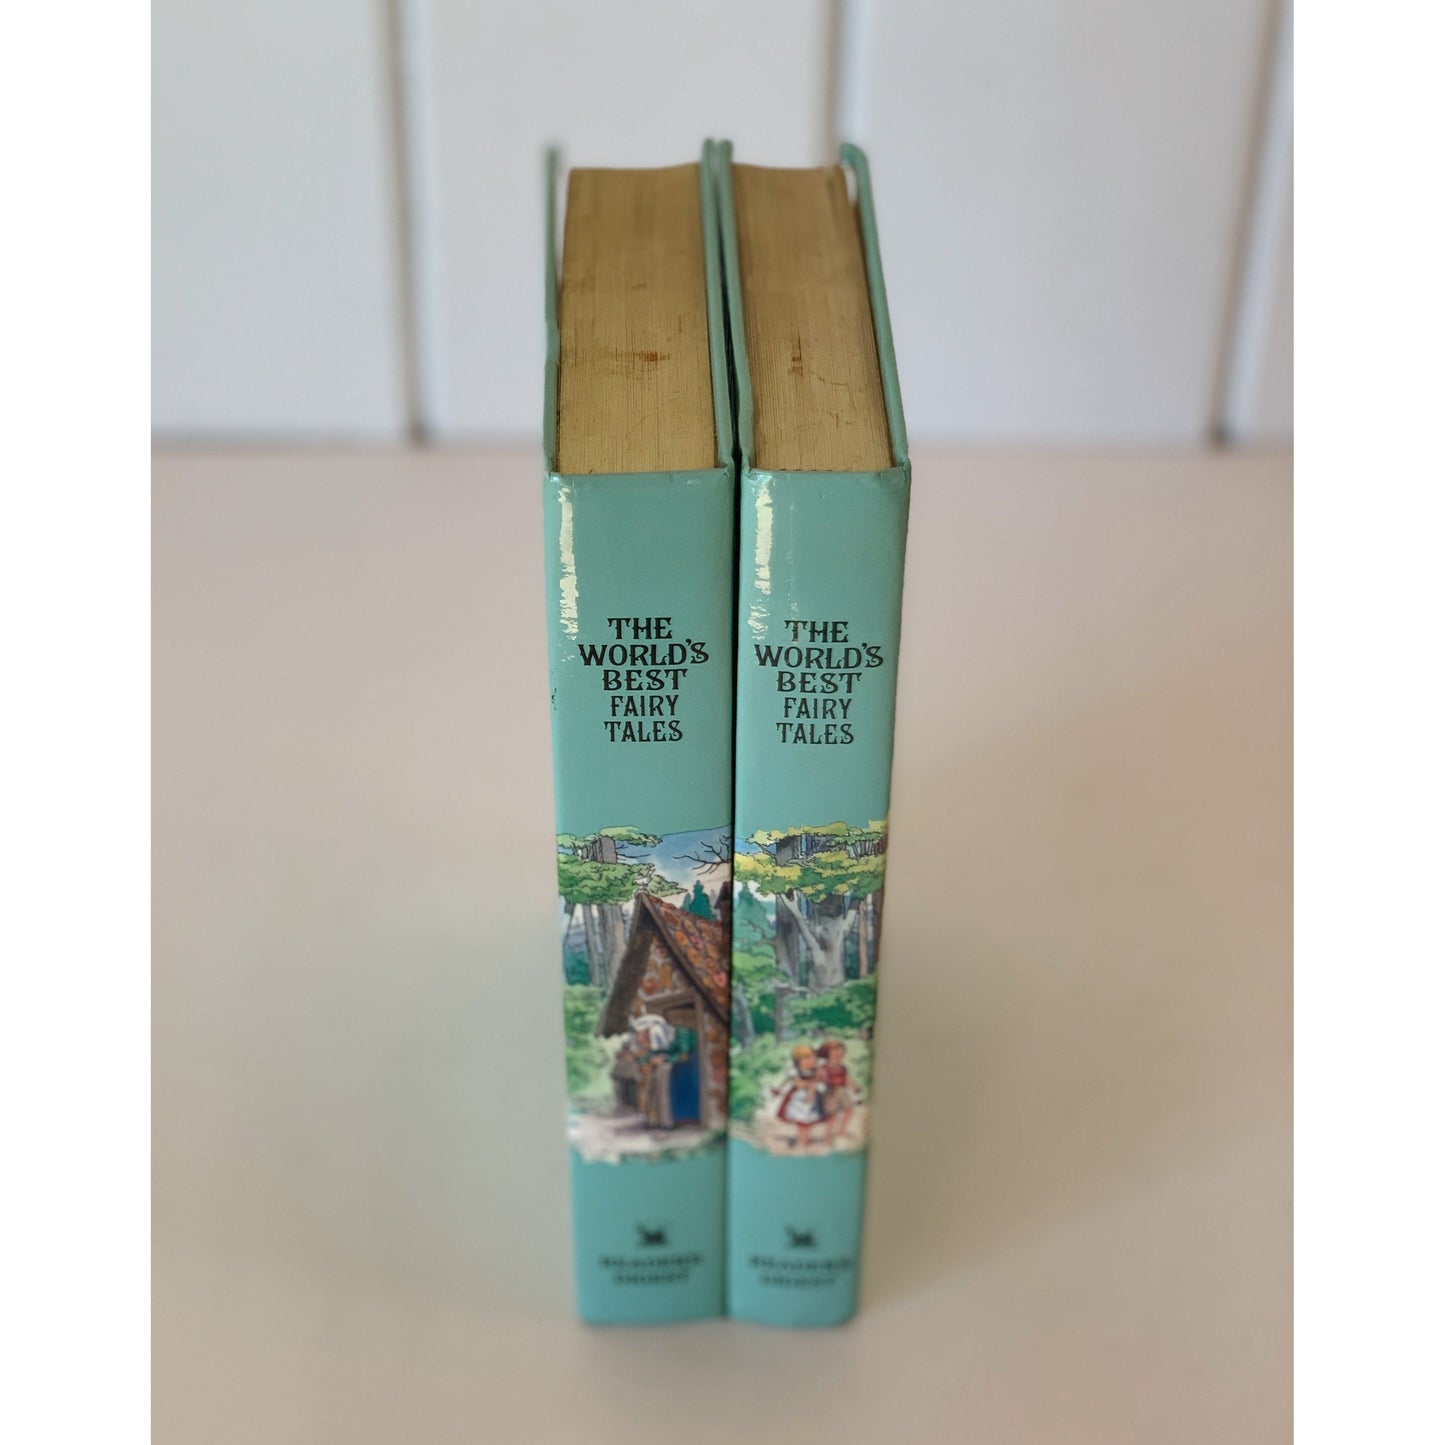 The World's Best Fairy Tales, Two Volume Set, Reader's Digest, 1988